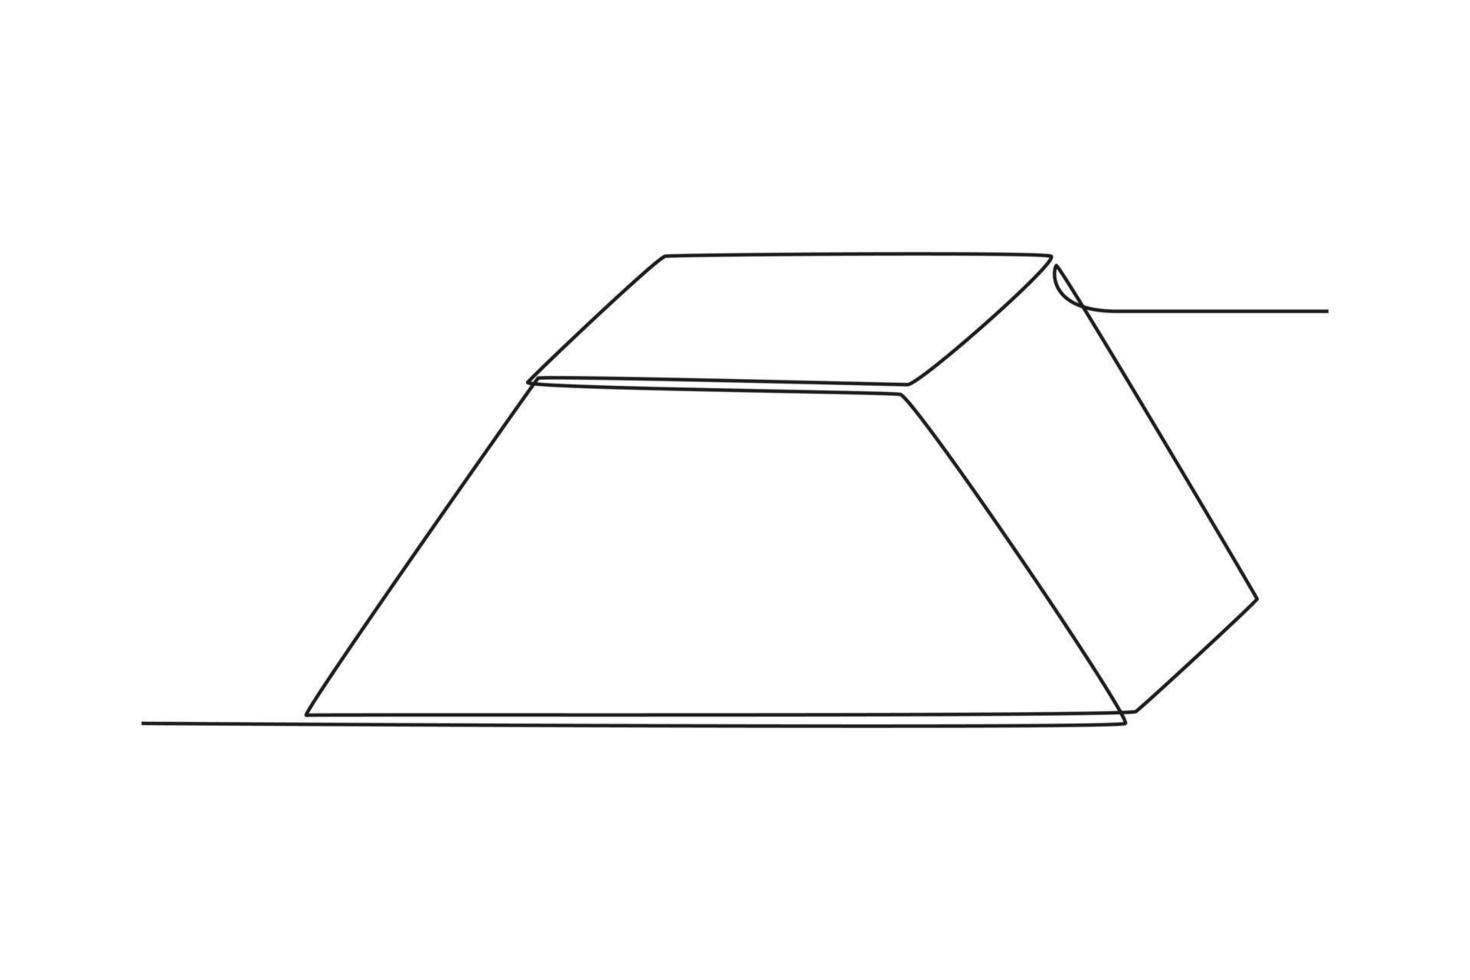 Single one line drawing trapezoidal prism. Geometric shapes concept. Continuous line draw design graphic vector illustration.